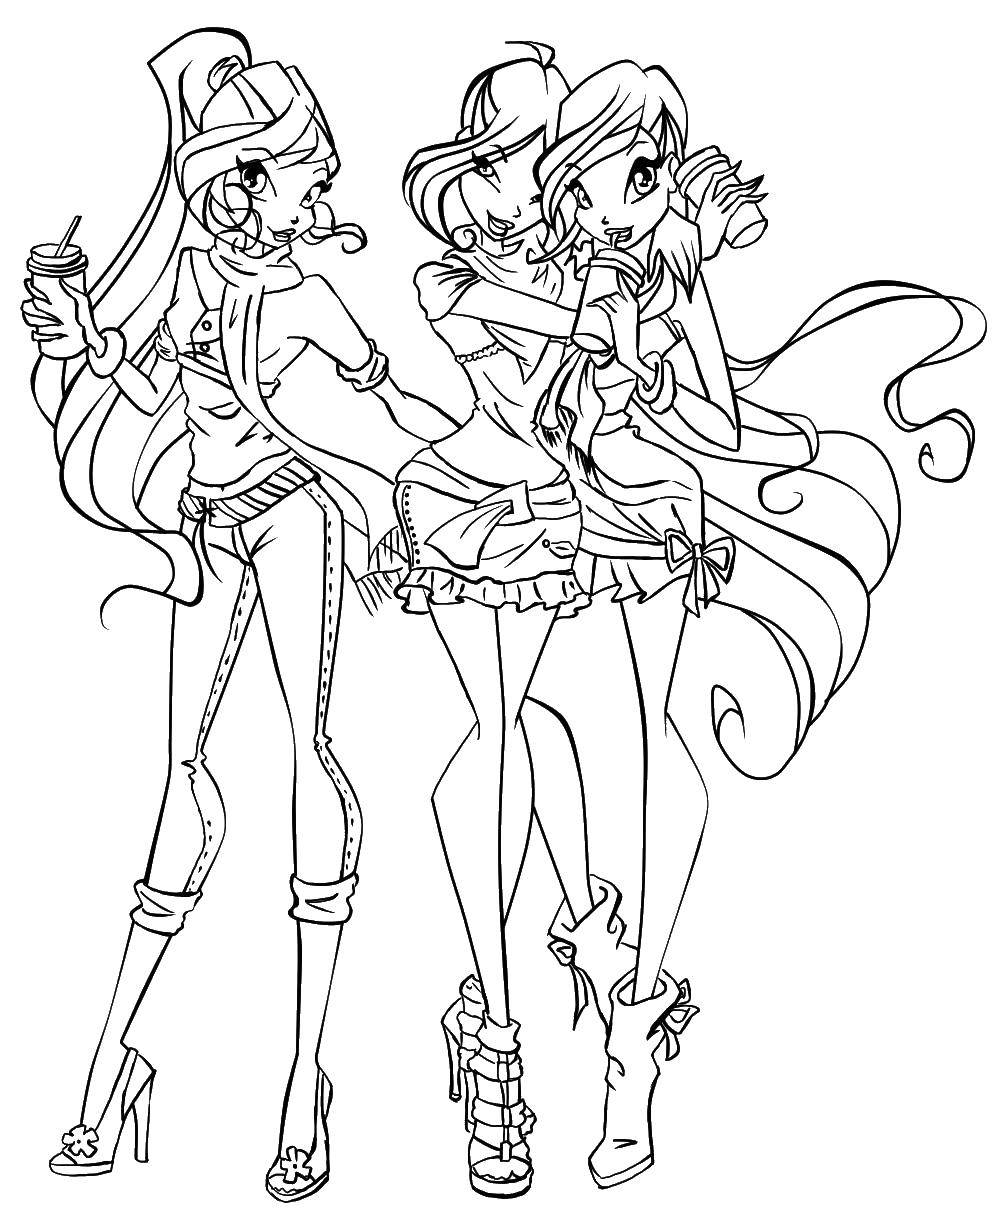 Coloring Bloom, Tecna and Stella. Category Winx. Tags:  Character cartoon, Winx.